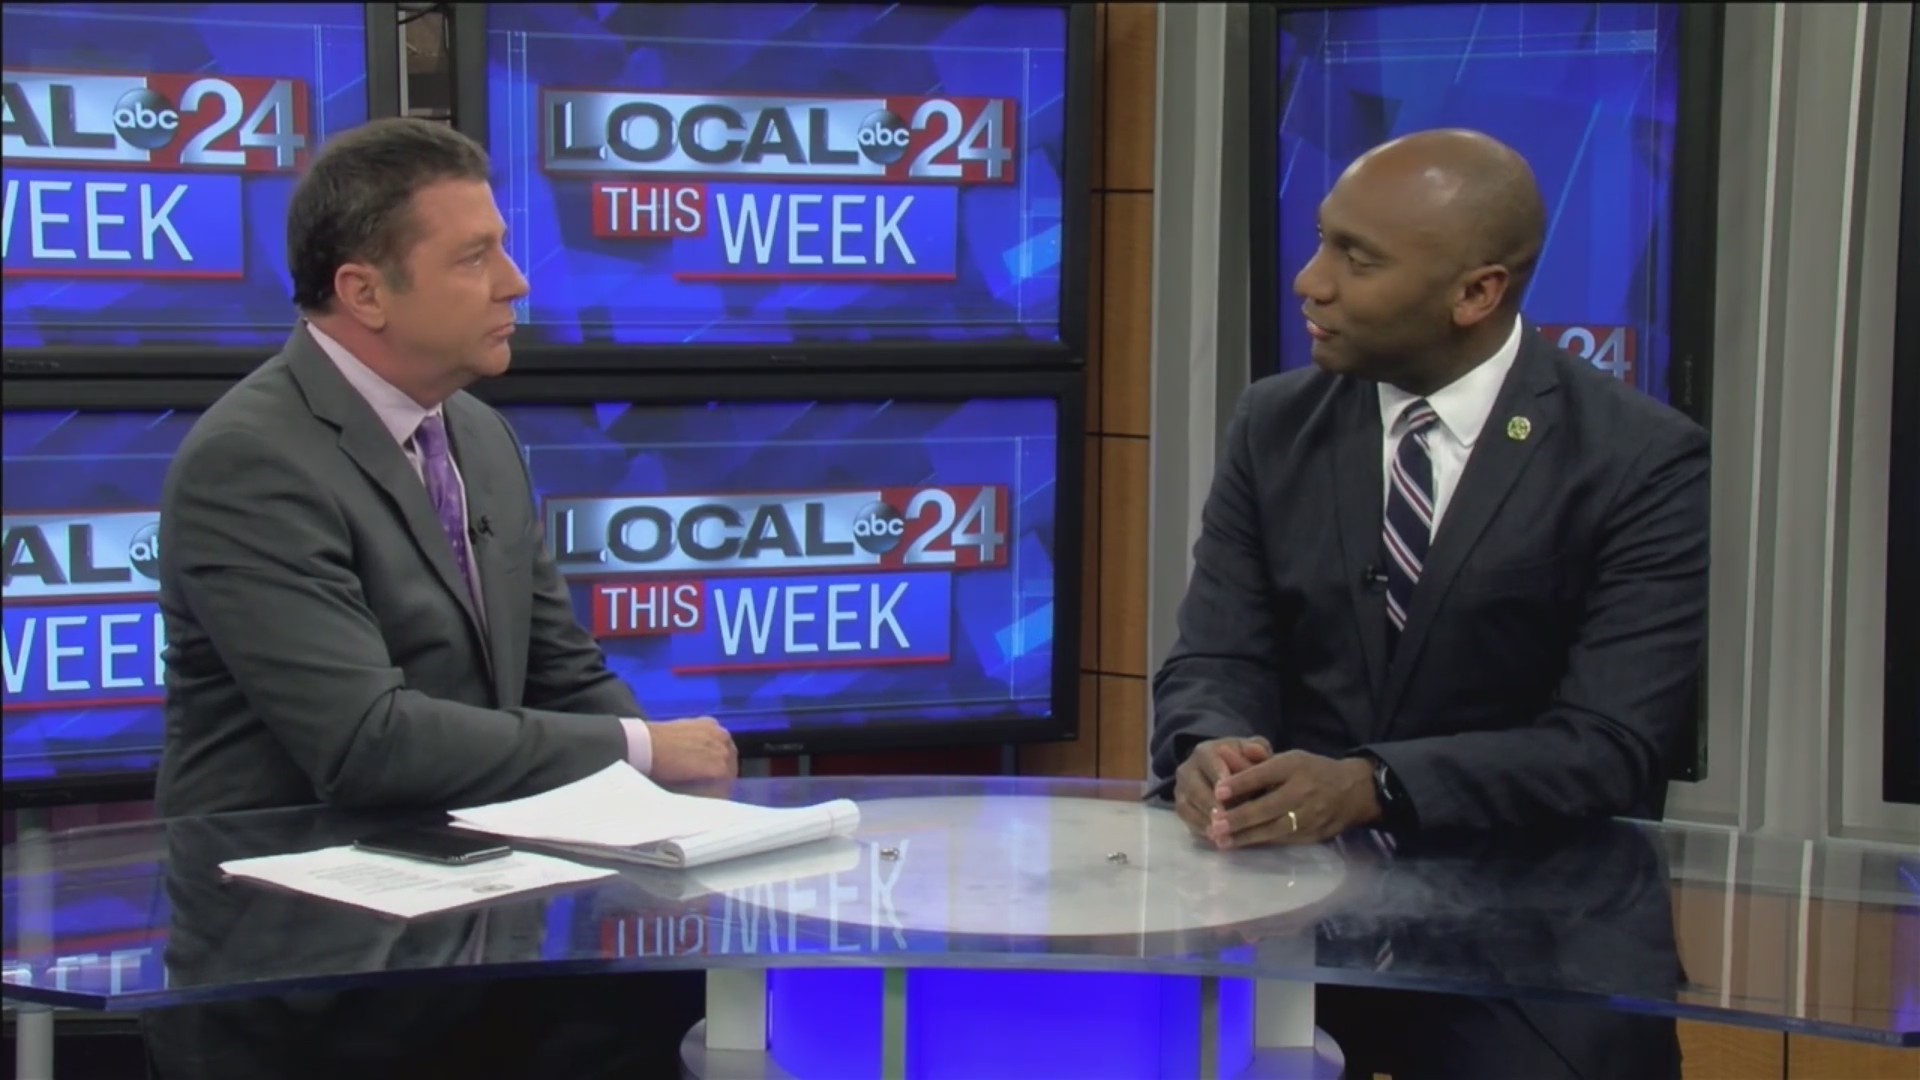 Local 24 This Week, Oct. 20, 2019